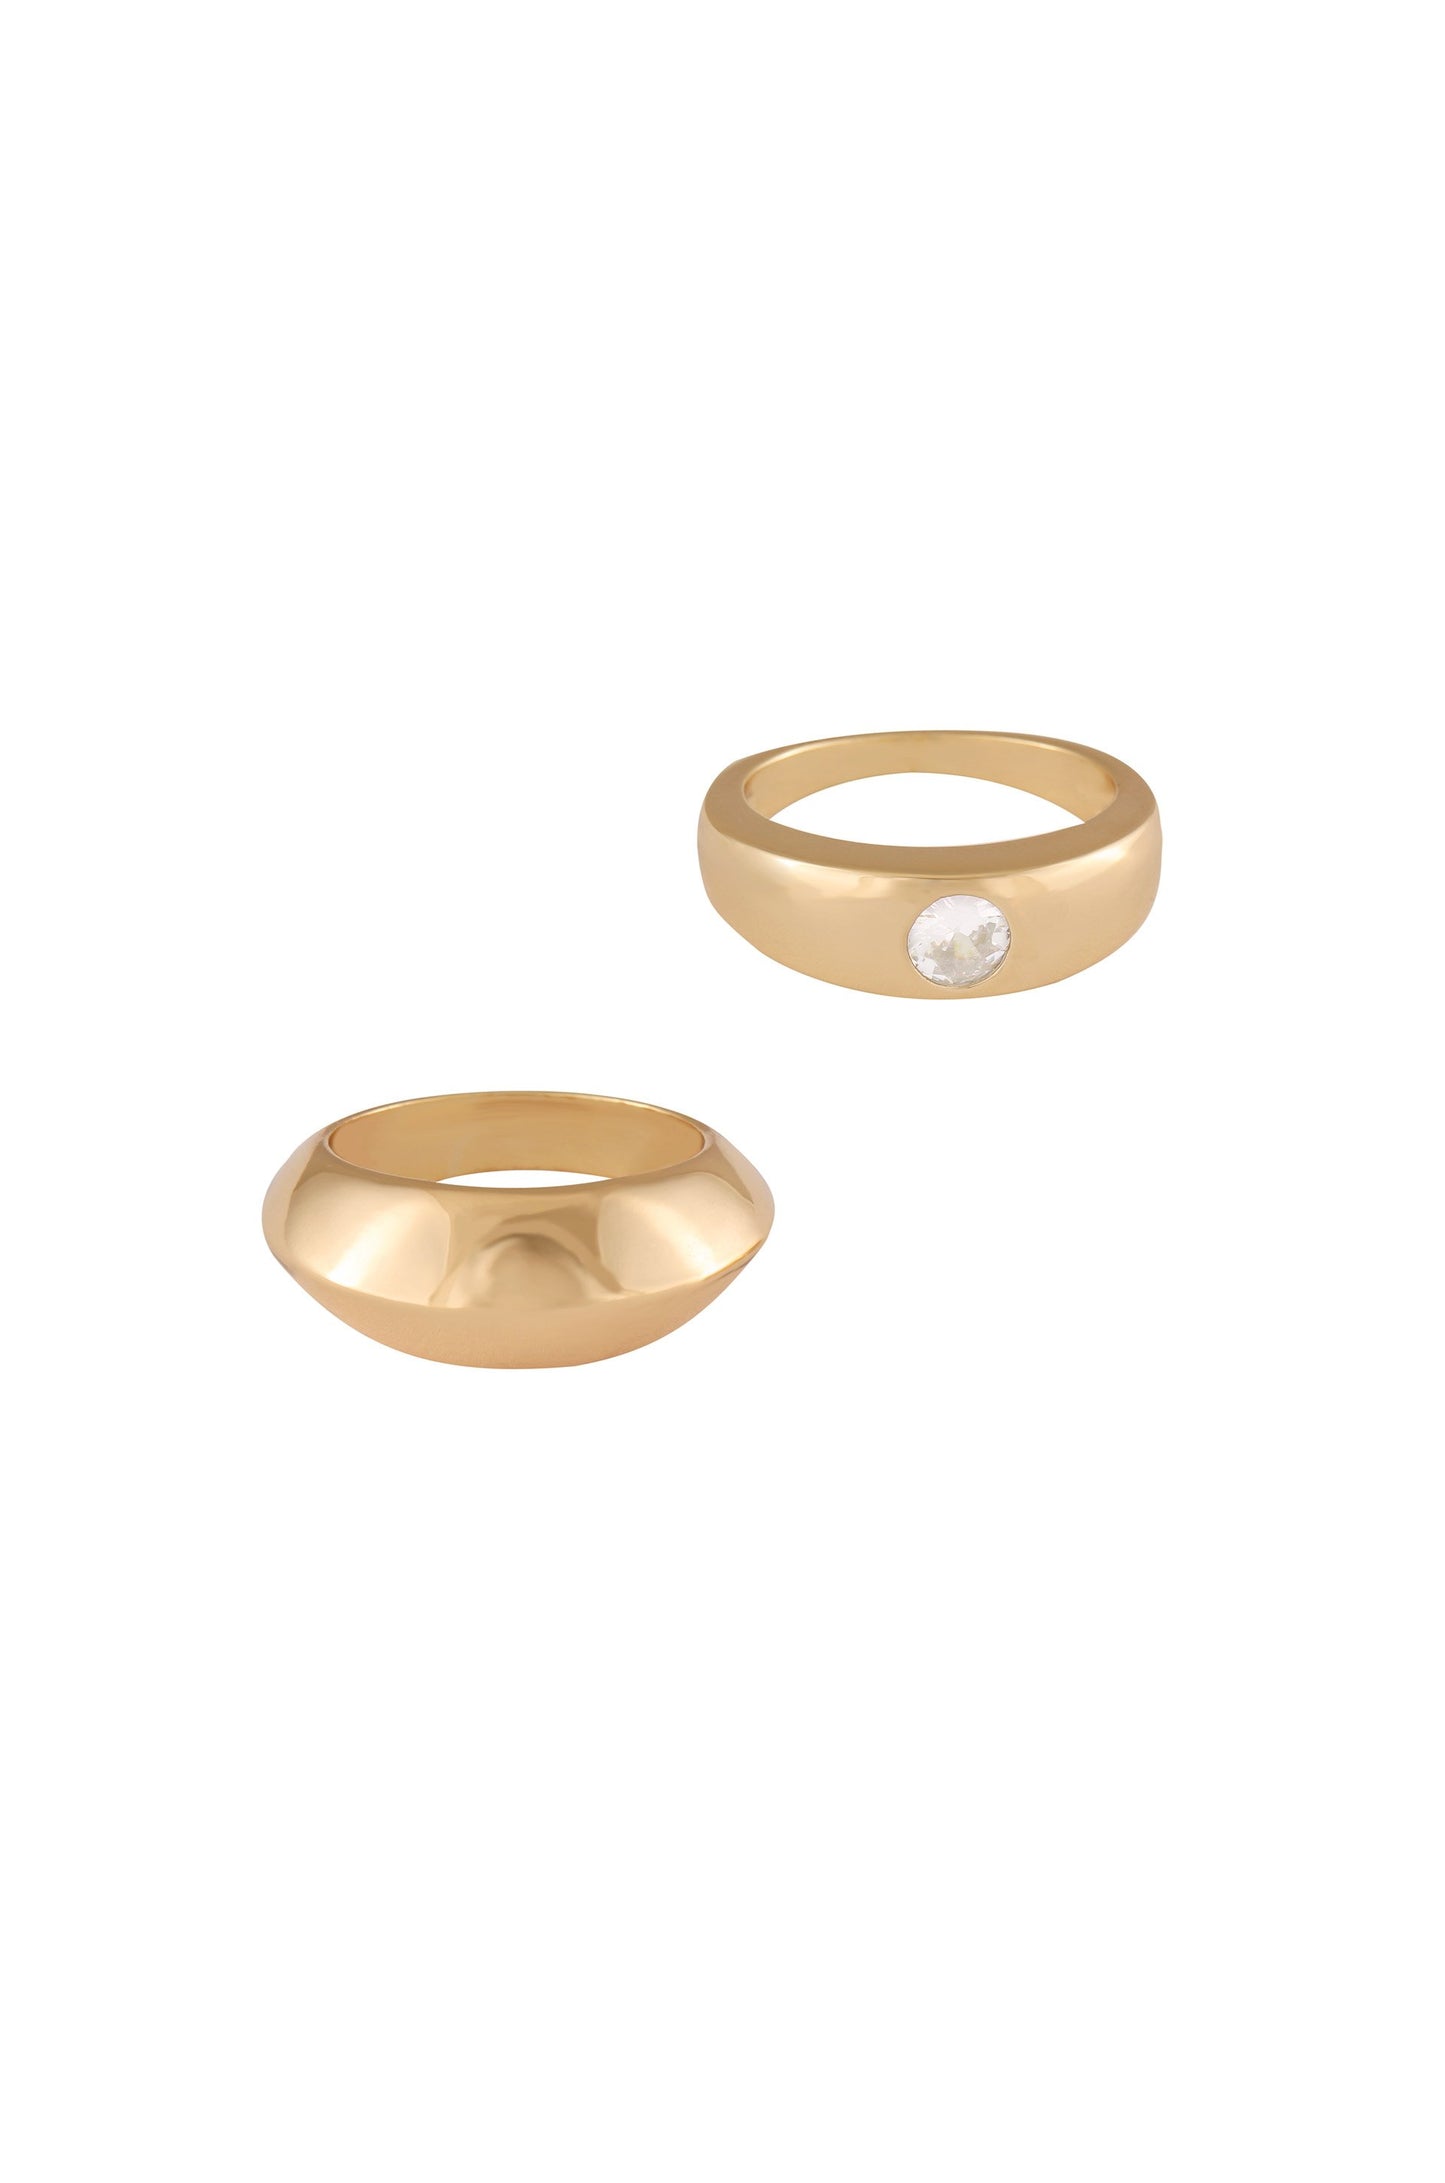 Statement 18k Gold Plated Band Ring Set on white background  